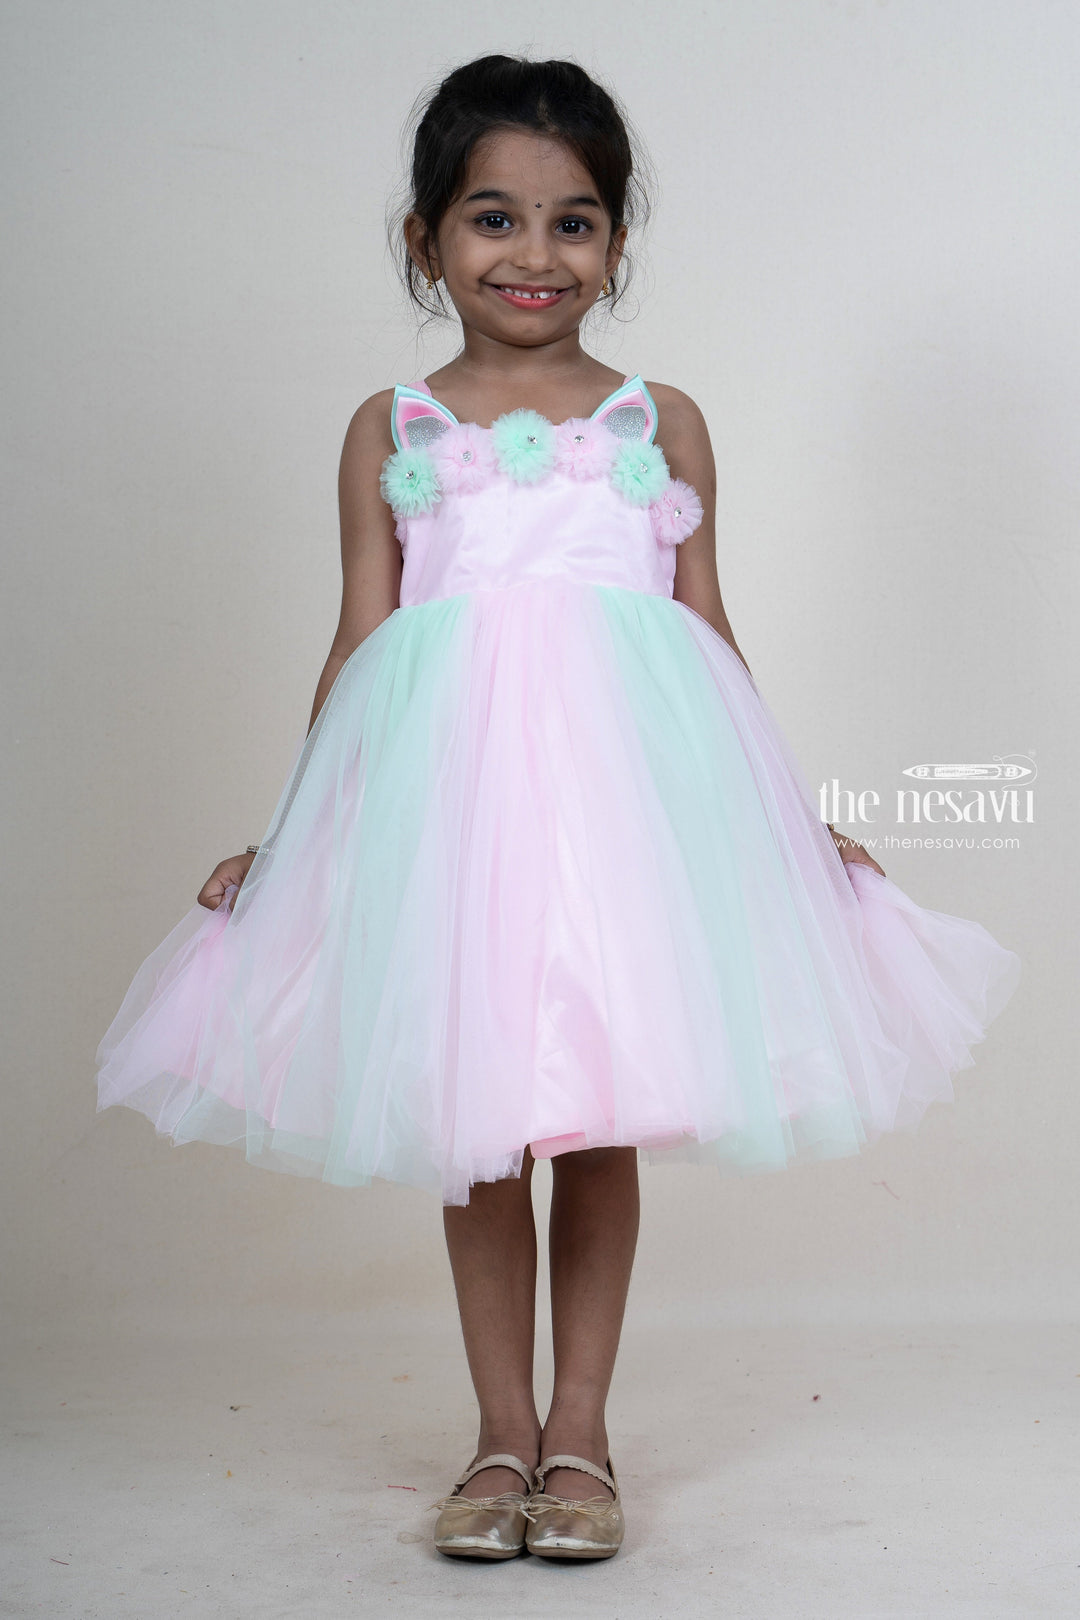 The Nesavu Girls Tutu Frock Baby Pink With Green Designer Soft Net Frock For Baby Girls Nesavu 16 (1Y) / Pink PF74A-16 Party Wear Gowns For Toddlers | Designer Floral Trims Patterns | The Nesavu